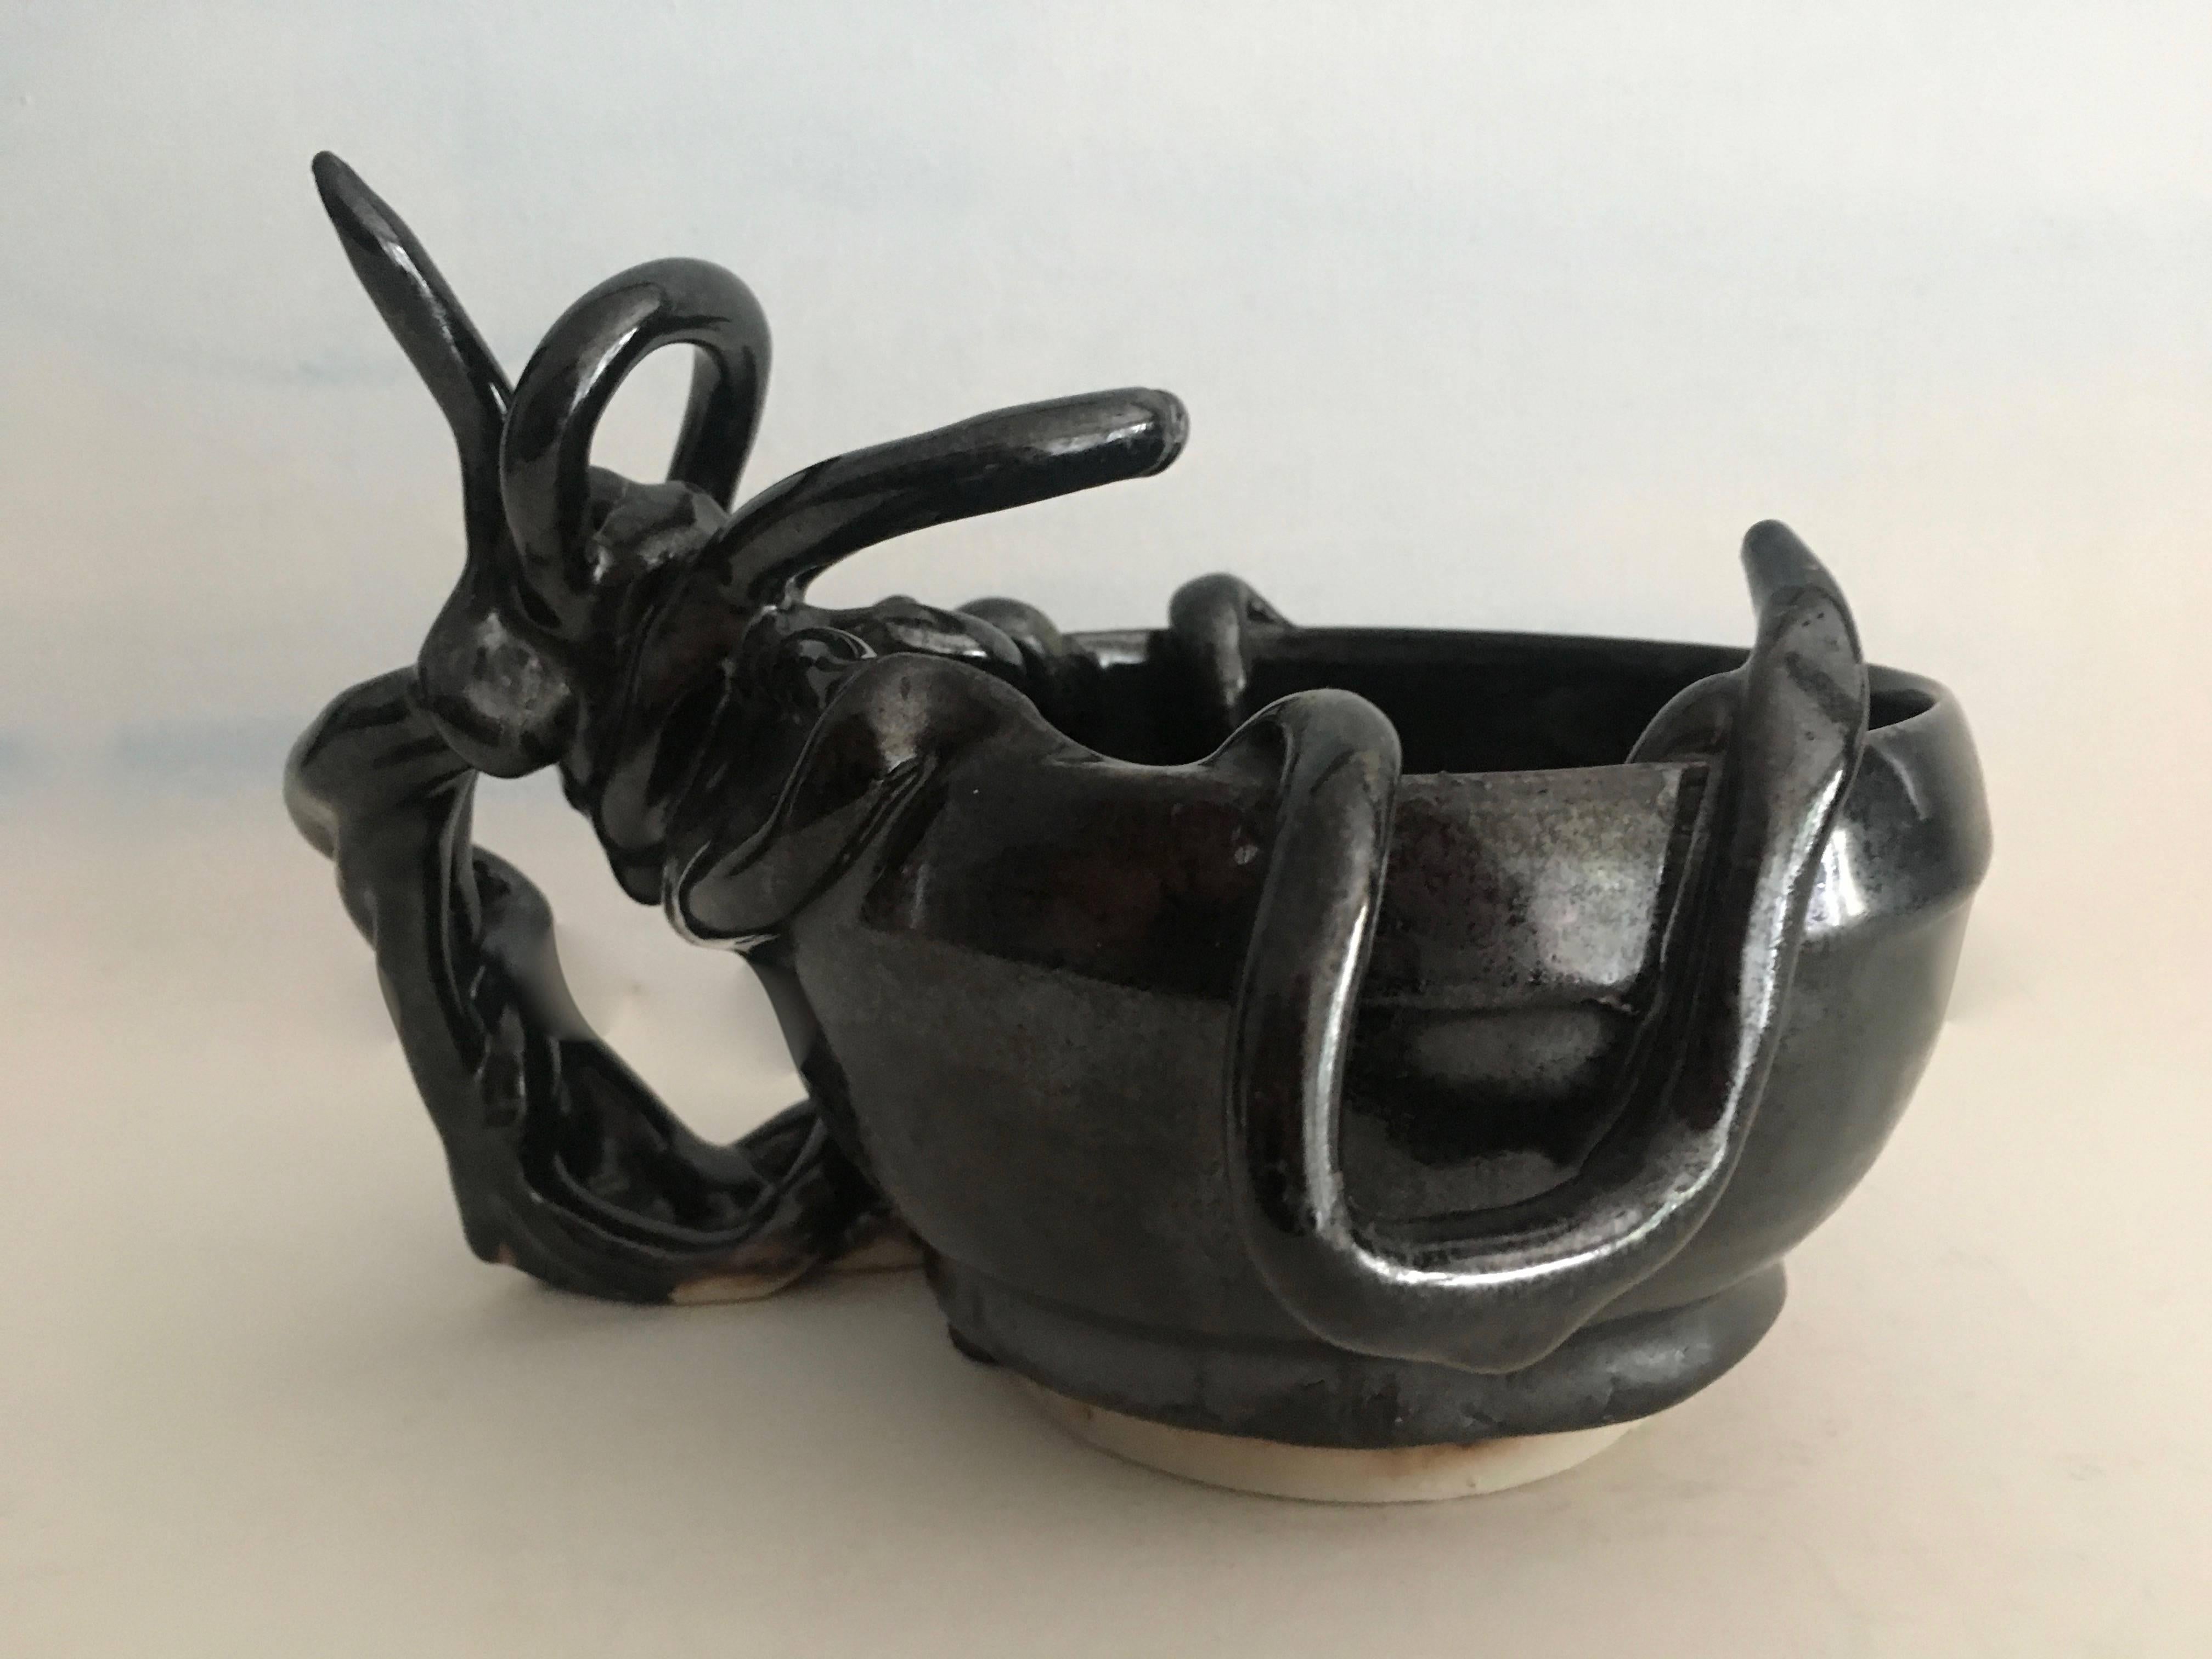 This unique and exquisite example of Japanese pottery is a one of a kind handmade piece unique in it's design - the piece can easily be a bowl, cup or vessel primarily for decorative display but could be utilized for candy nuts etc.